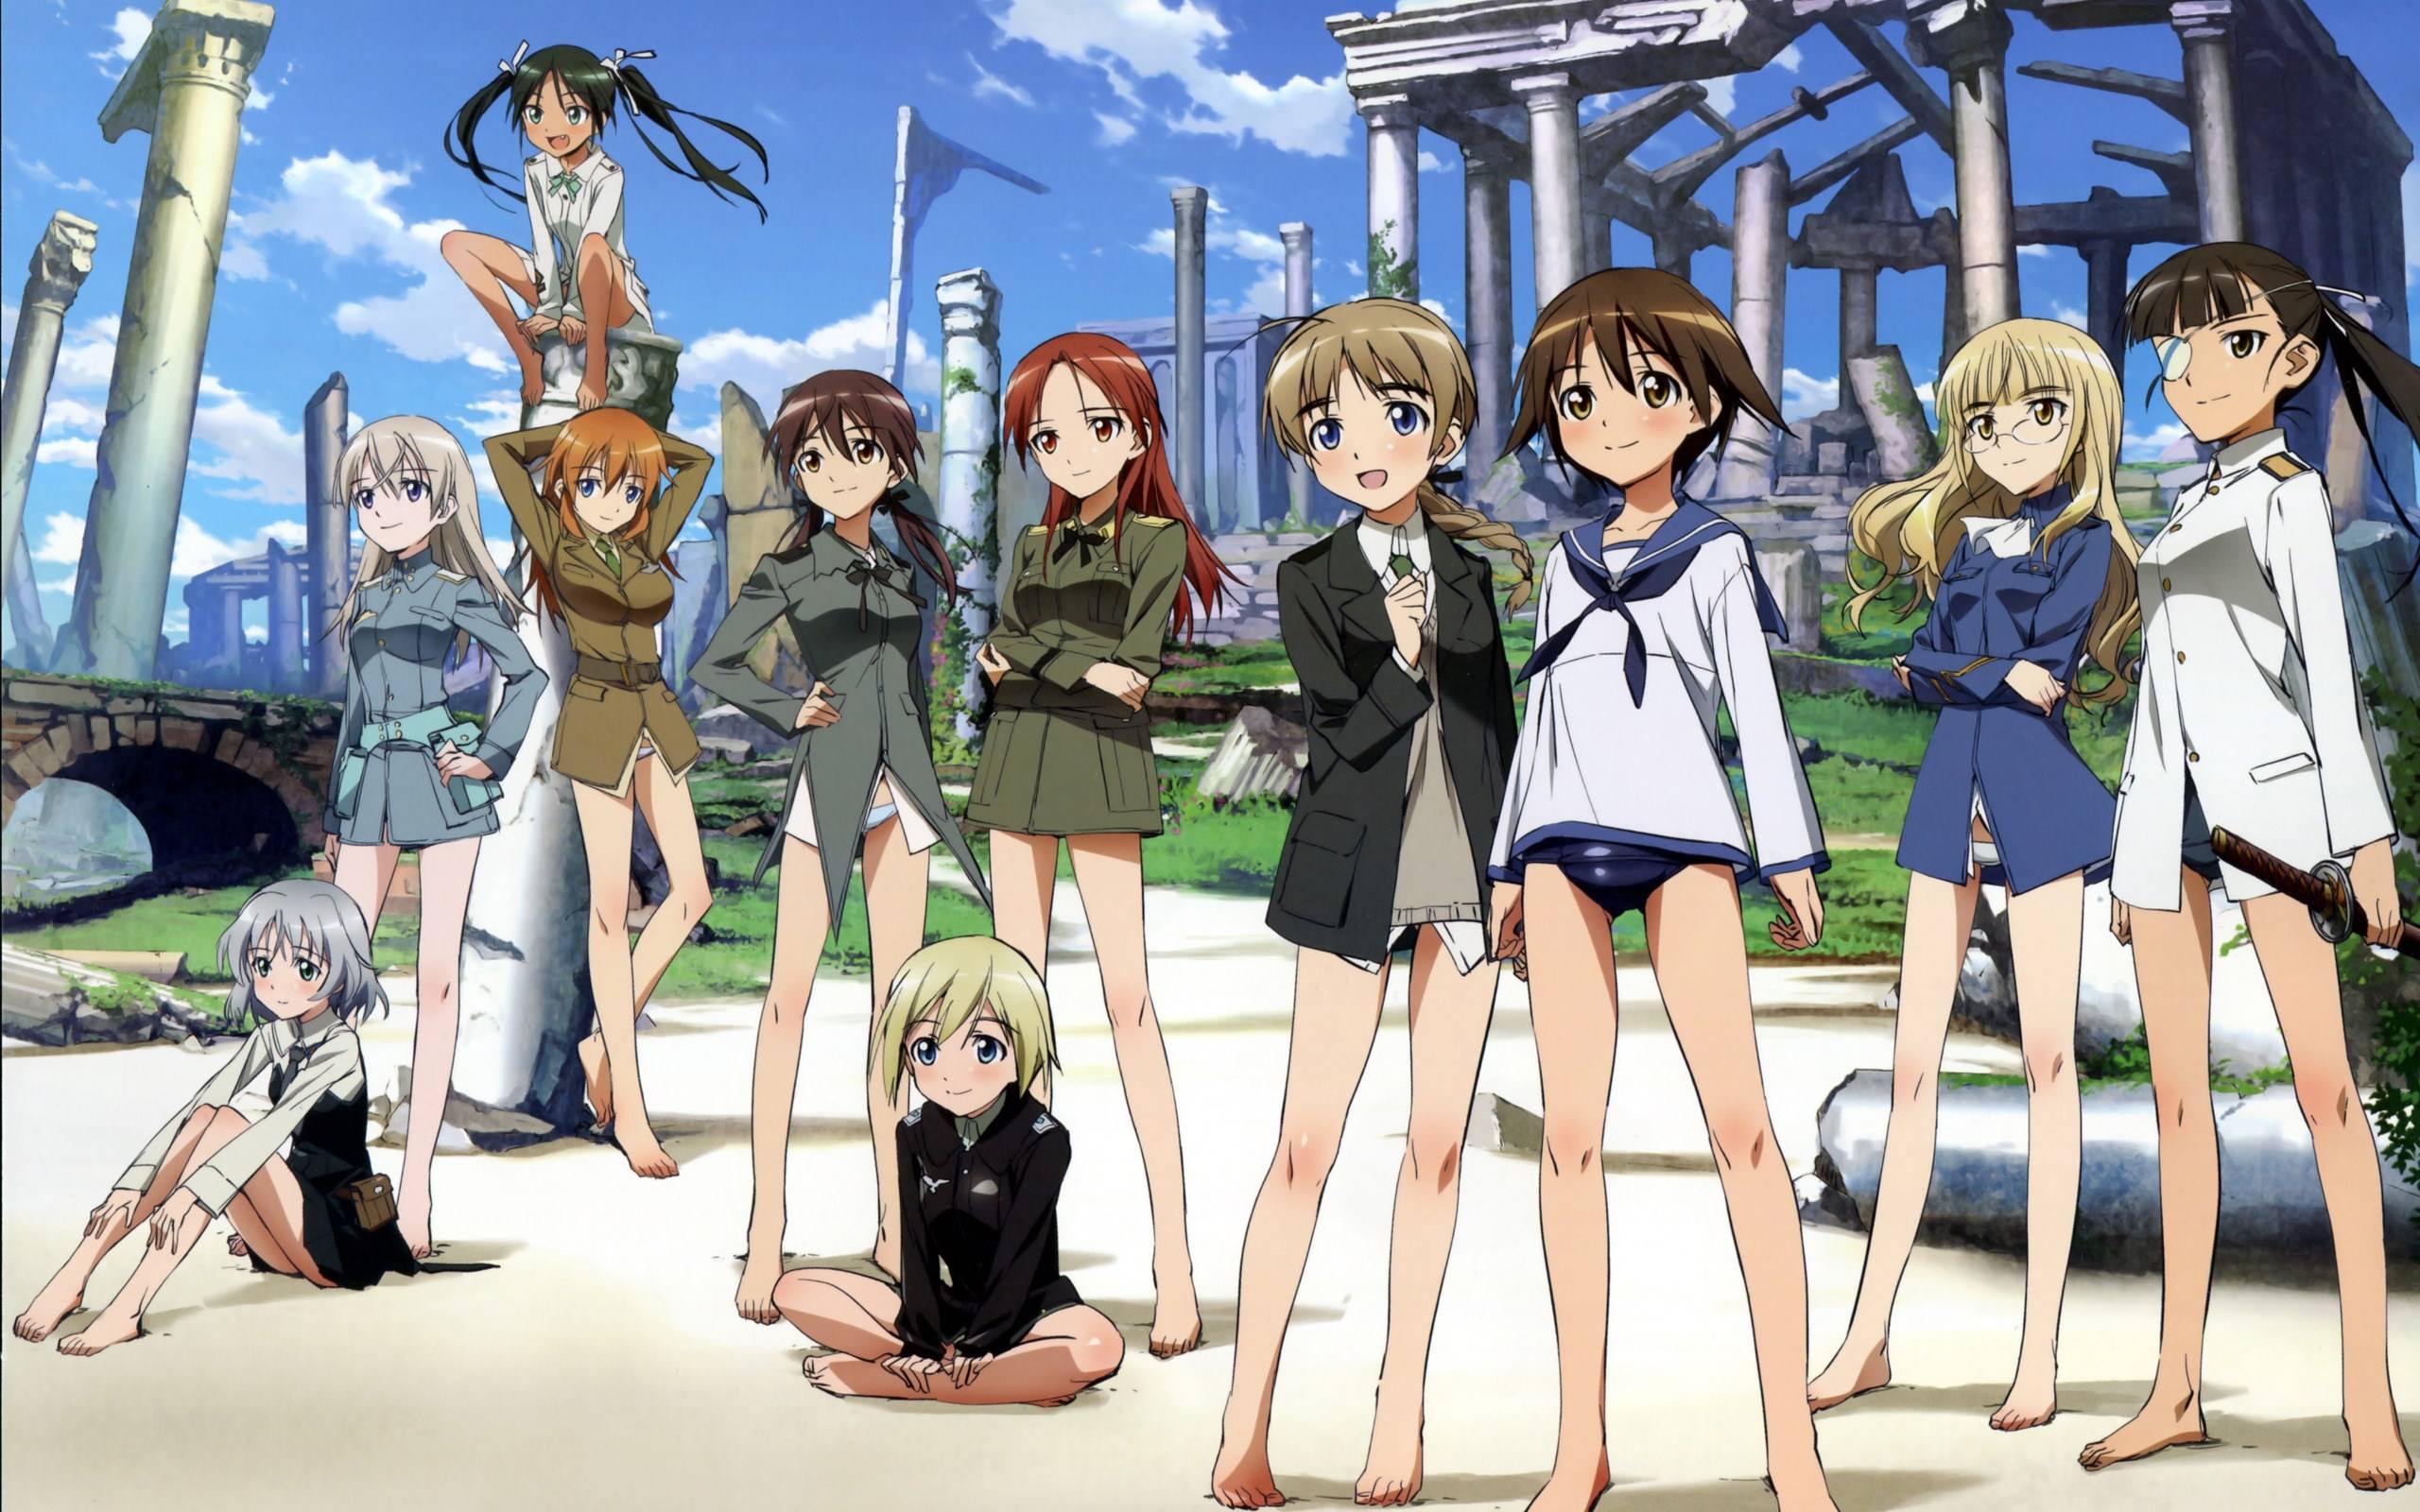 Strike Witches #6